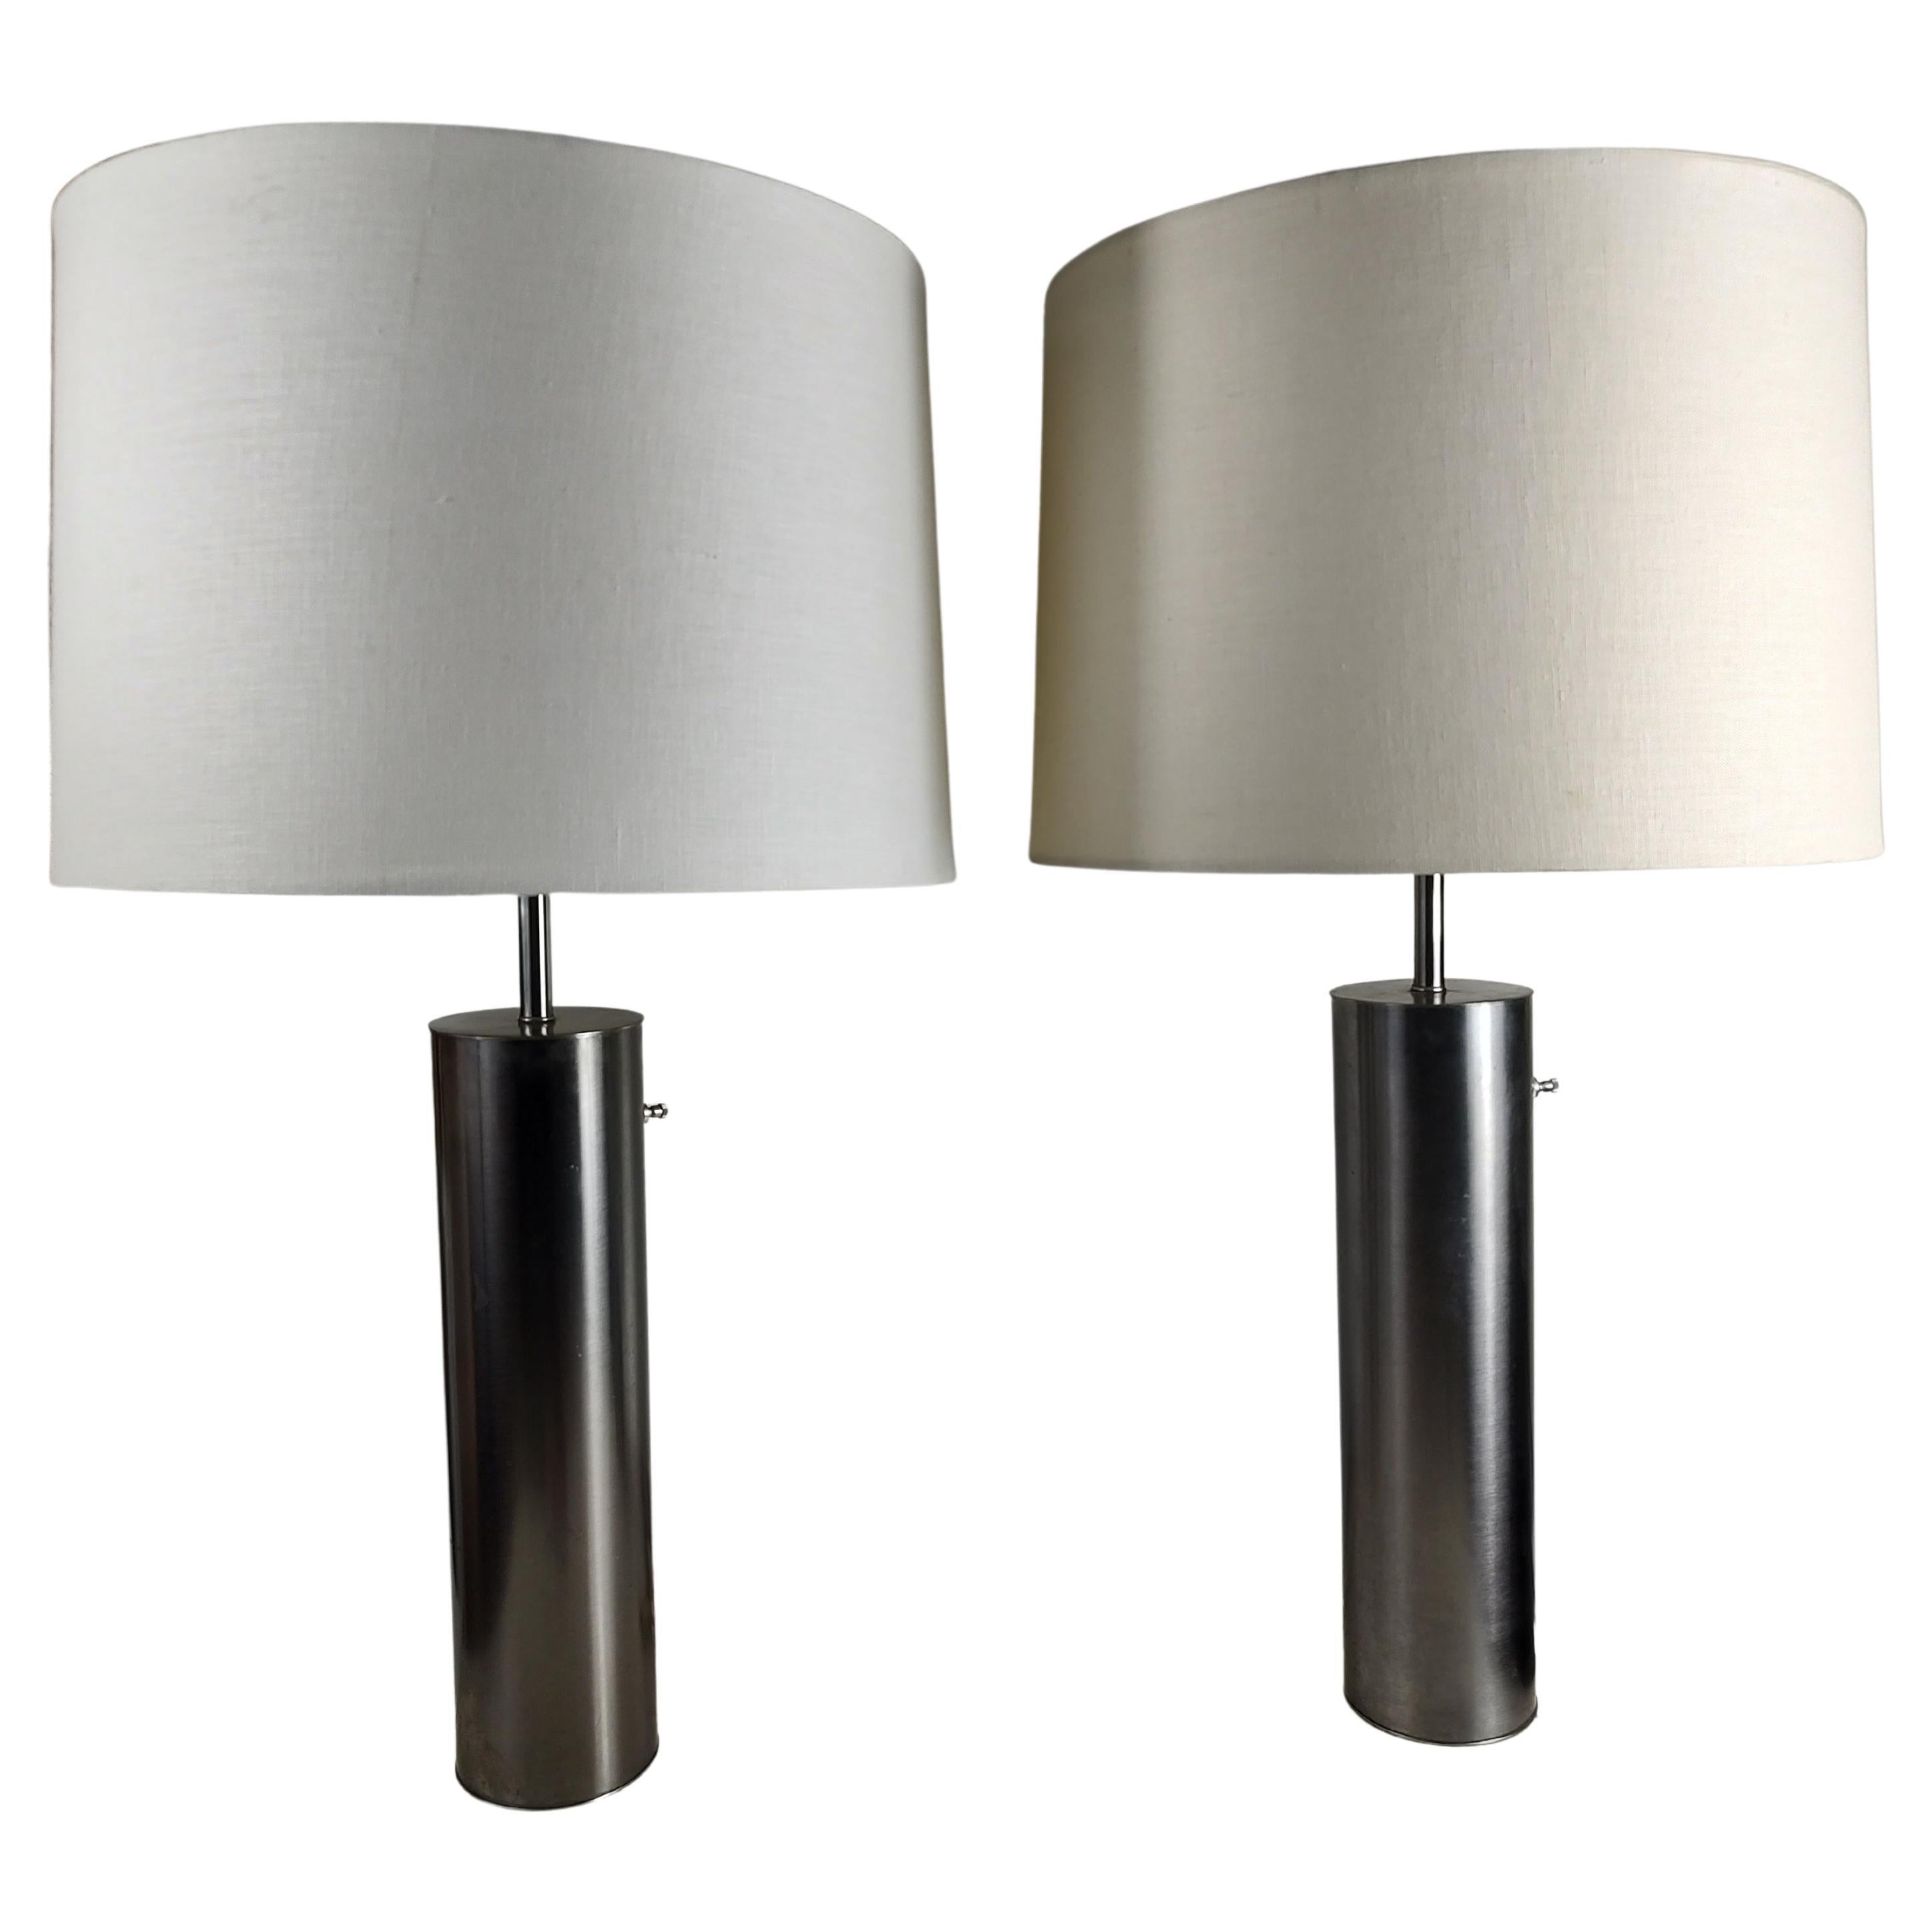 Pair of Walter & Greta Von Neesen Stainless Cylindrical Table Lamps, circa 1965 For Sale